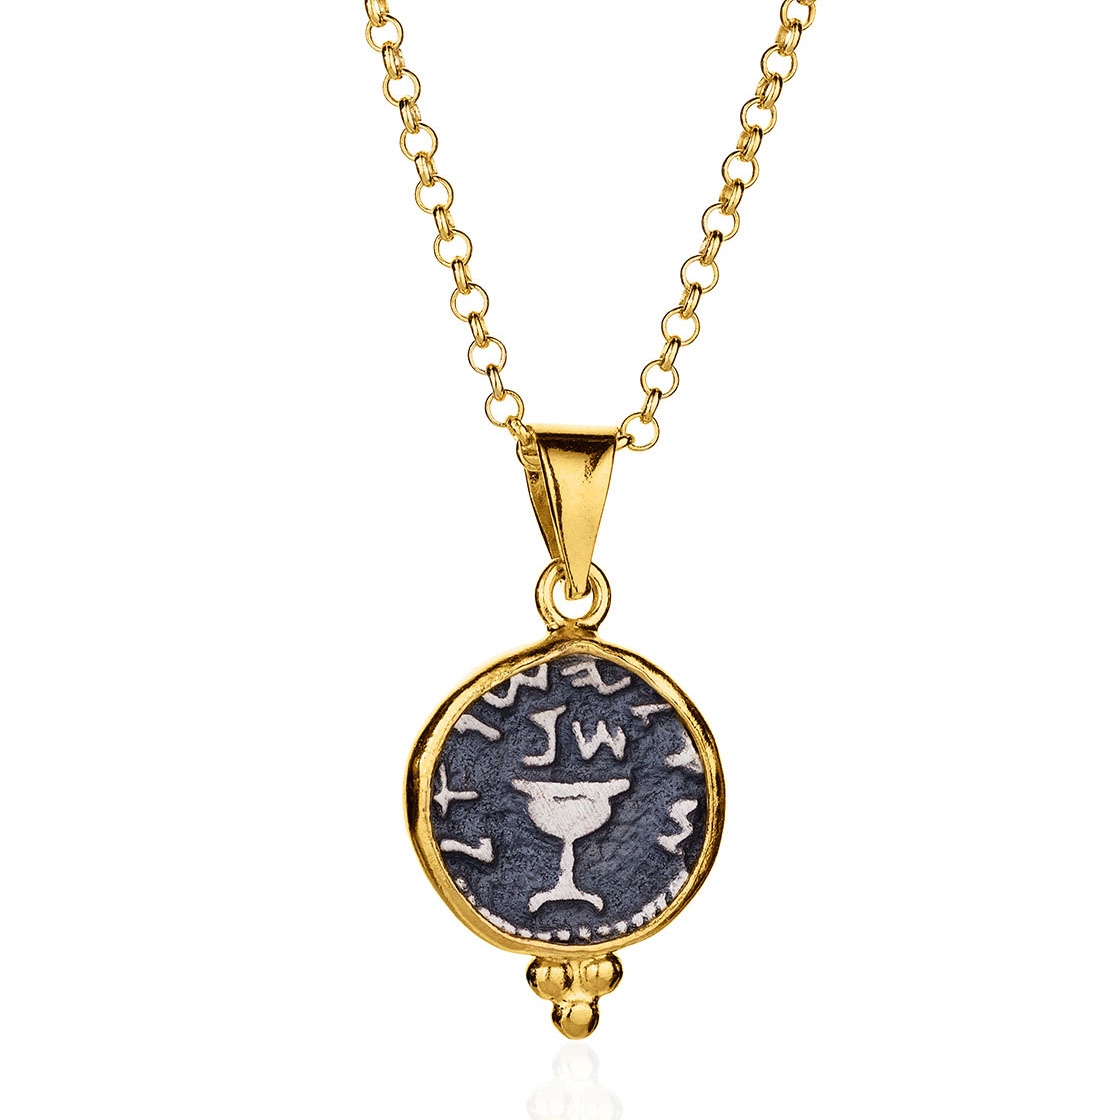 Gold-Plated Sterling Silver Necklace With Replica of Ancient Half Shekel Coin - 1